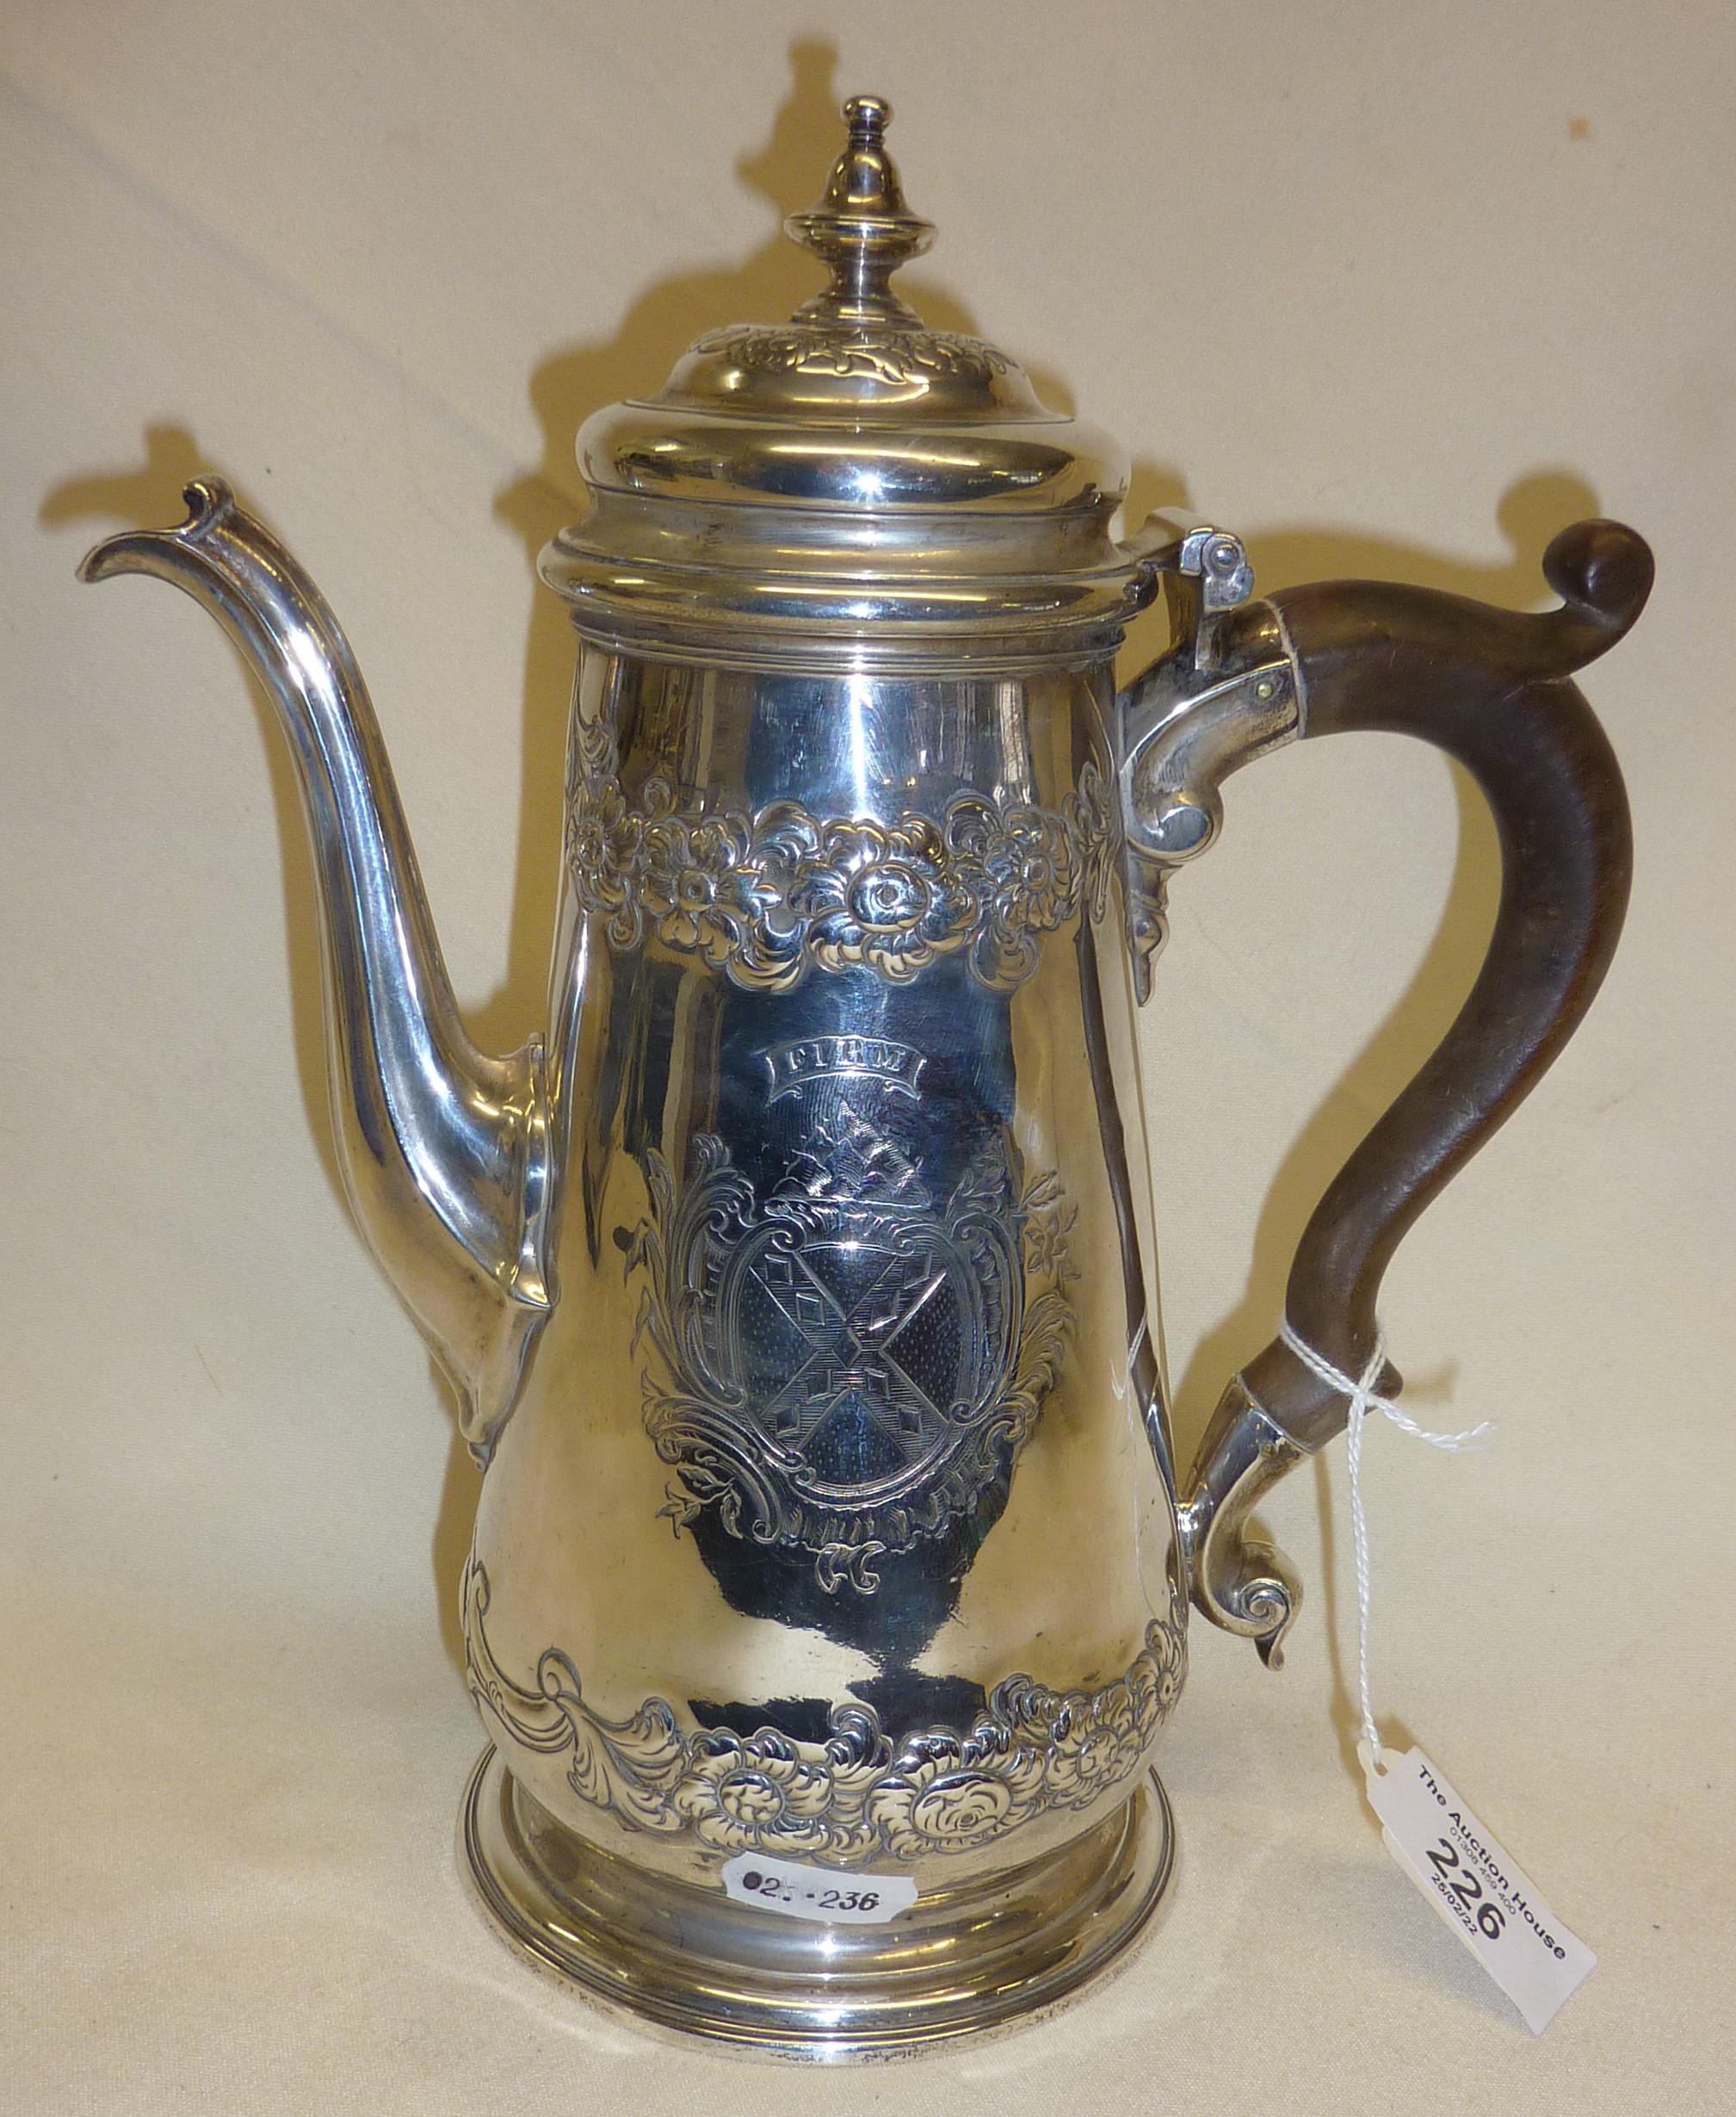 Heavy Georgian Sterling silver coffee pot with repoussé decoration. Hallmarked for London 1742,